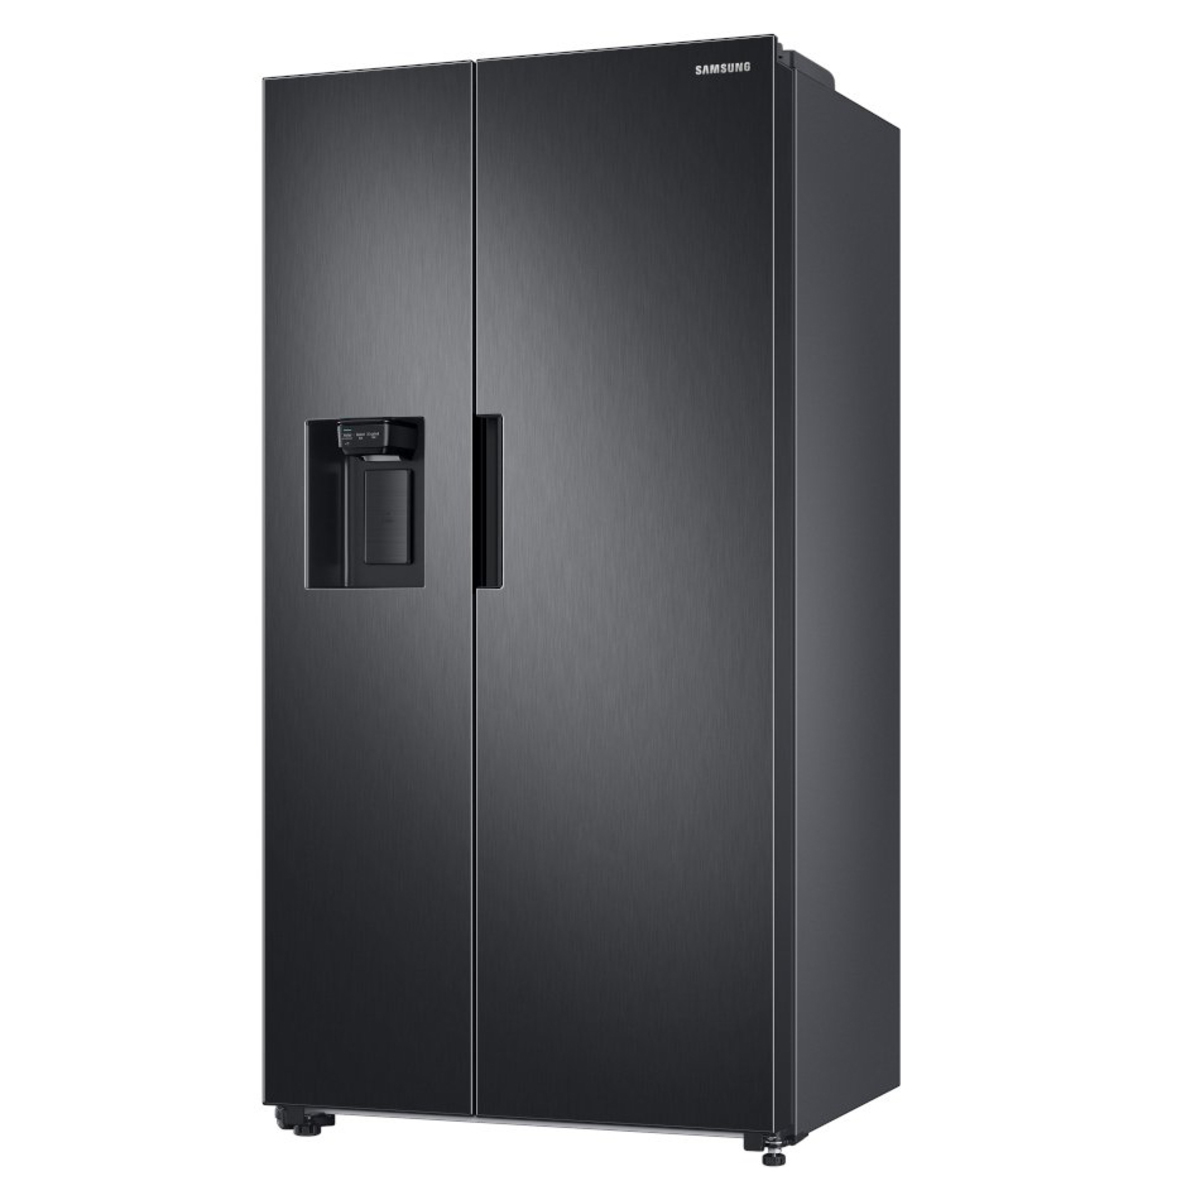 Samsung RS67A8810B1 American Style Fridge Freezer, SpaceMax Technology